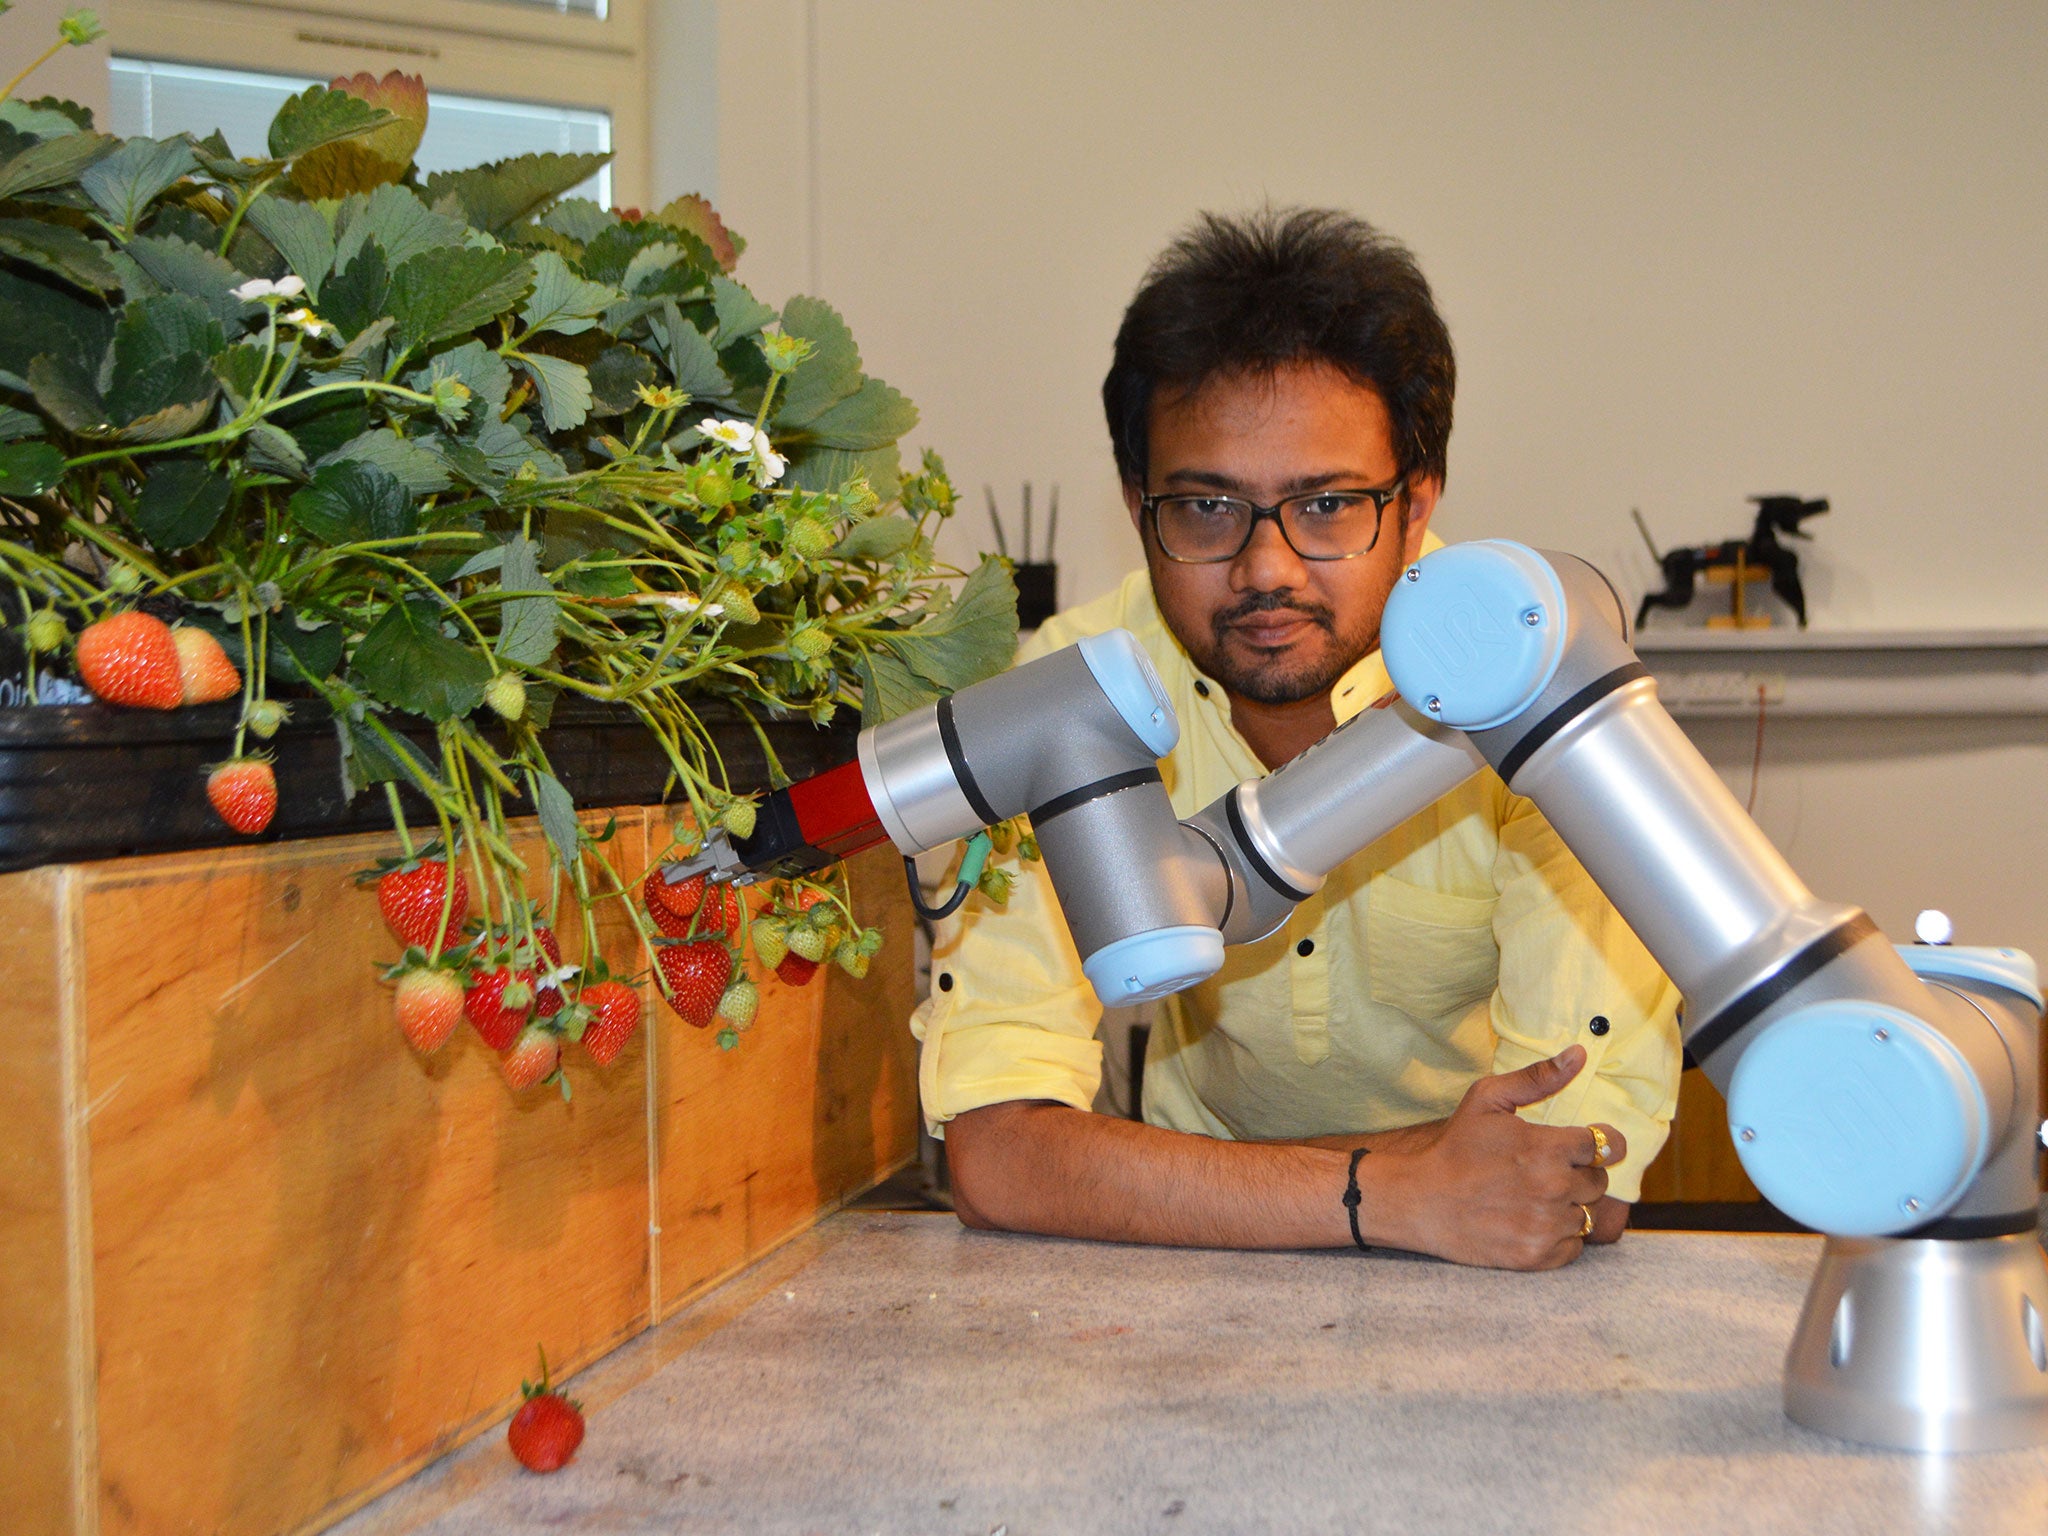 Dr Vishuu Mohan, from the University of Essex’s School of Computer Science and Electronic Engineering, is part of a major project looking at how robots can help pick fruit